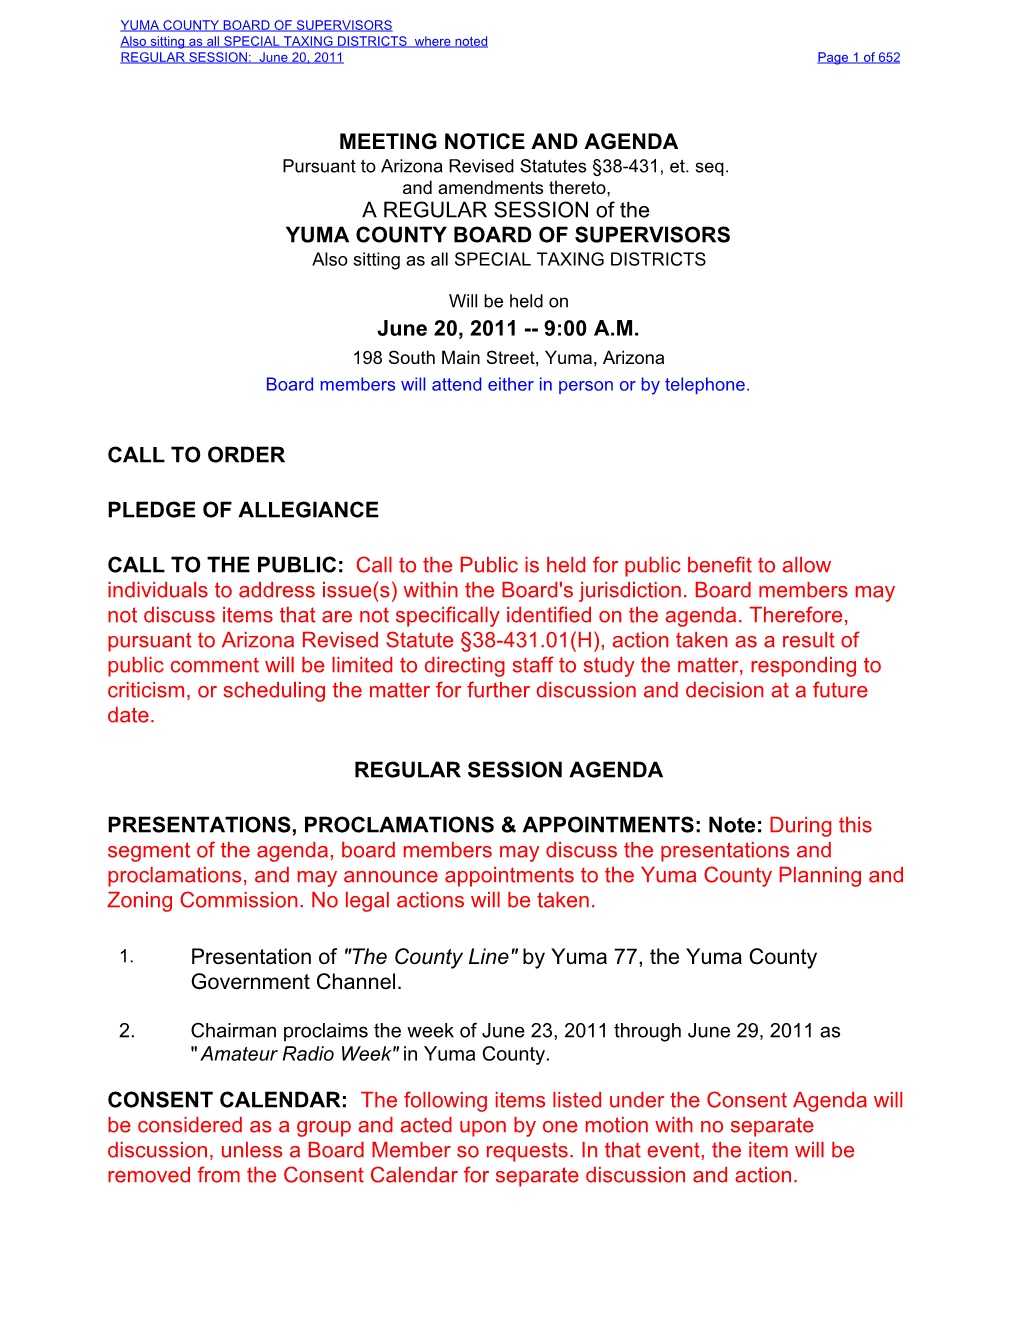 MEETING NOTICE and AGENDA a REGULAR SESSION of the YUMA